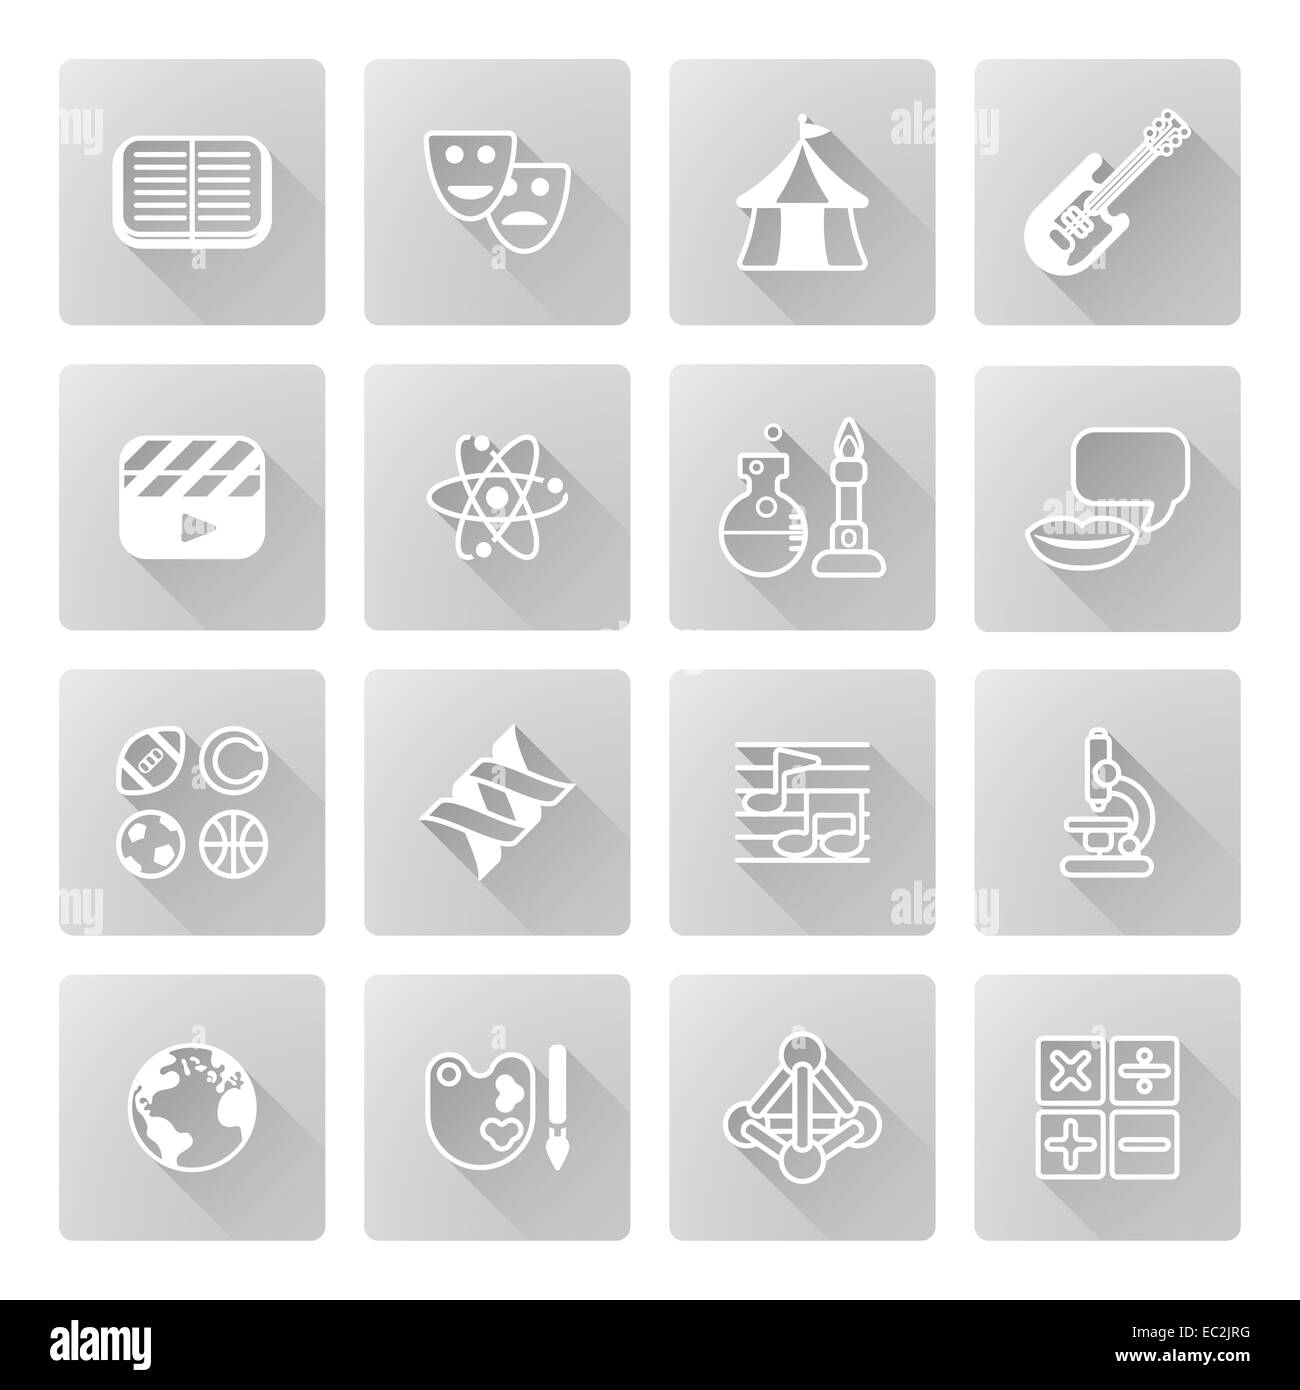 Education or quiz subject icons covering math, sports, music, science, history and lots more Stock Photo